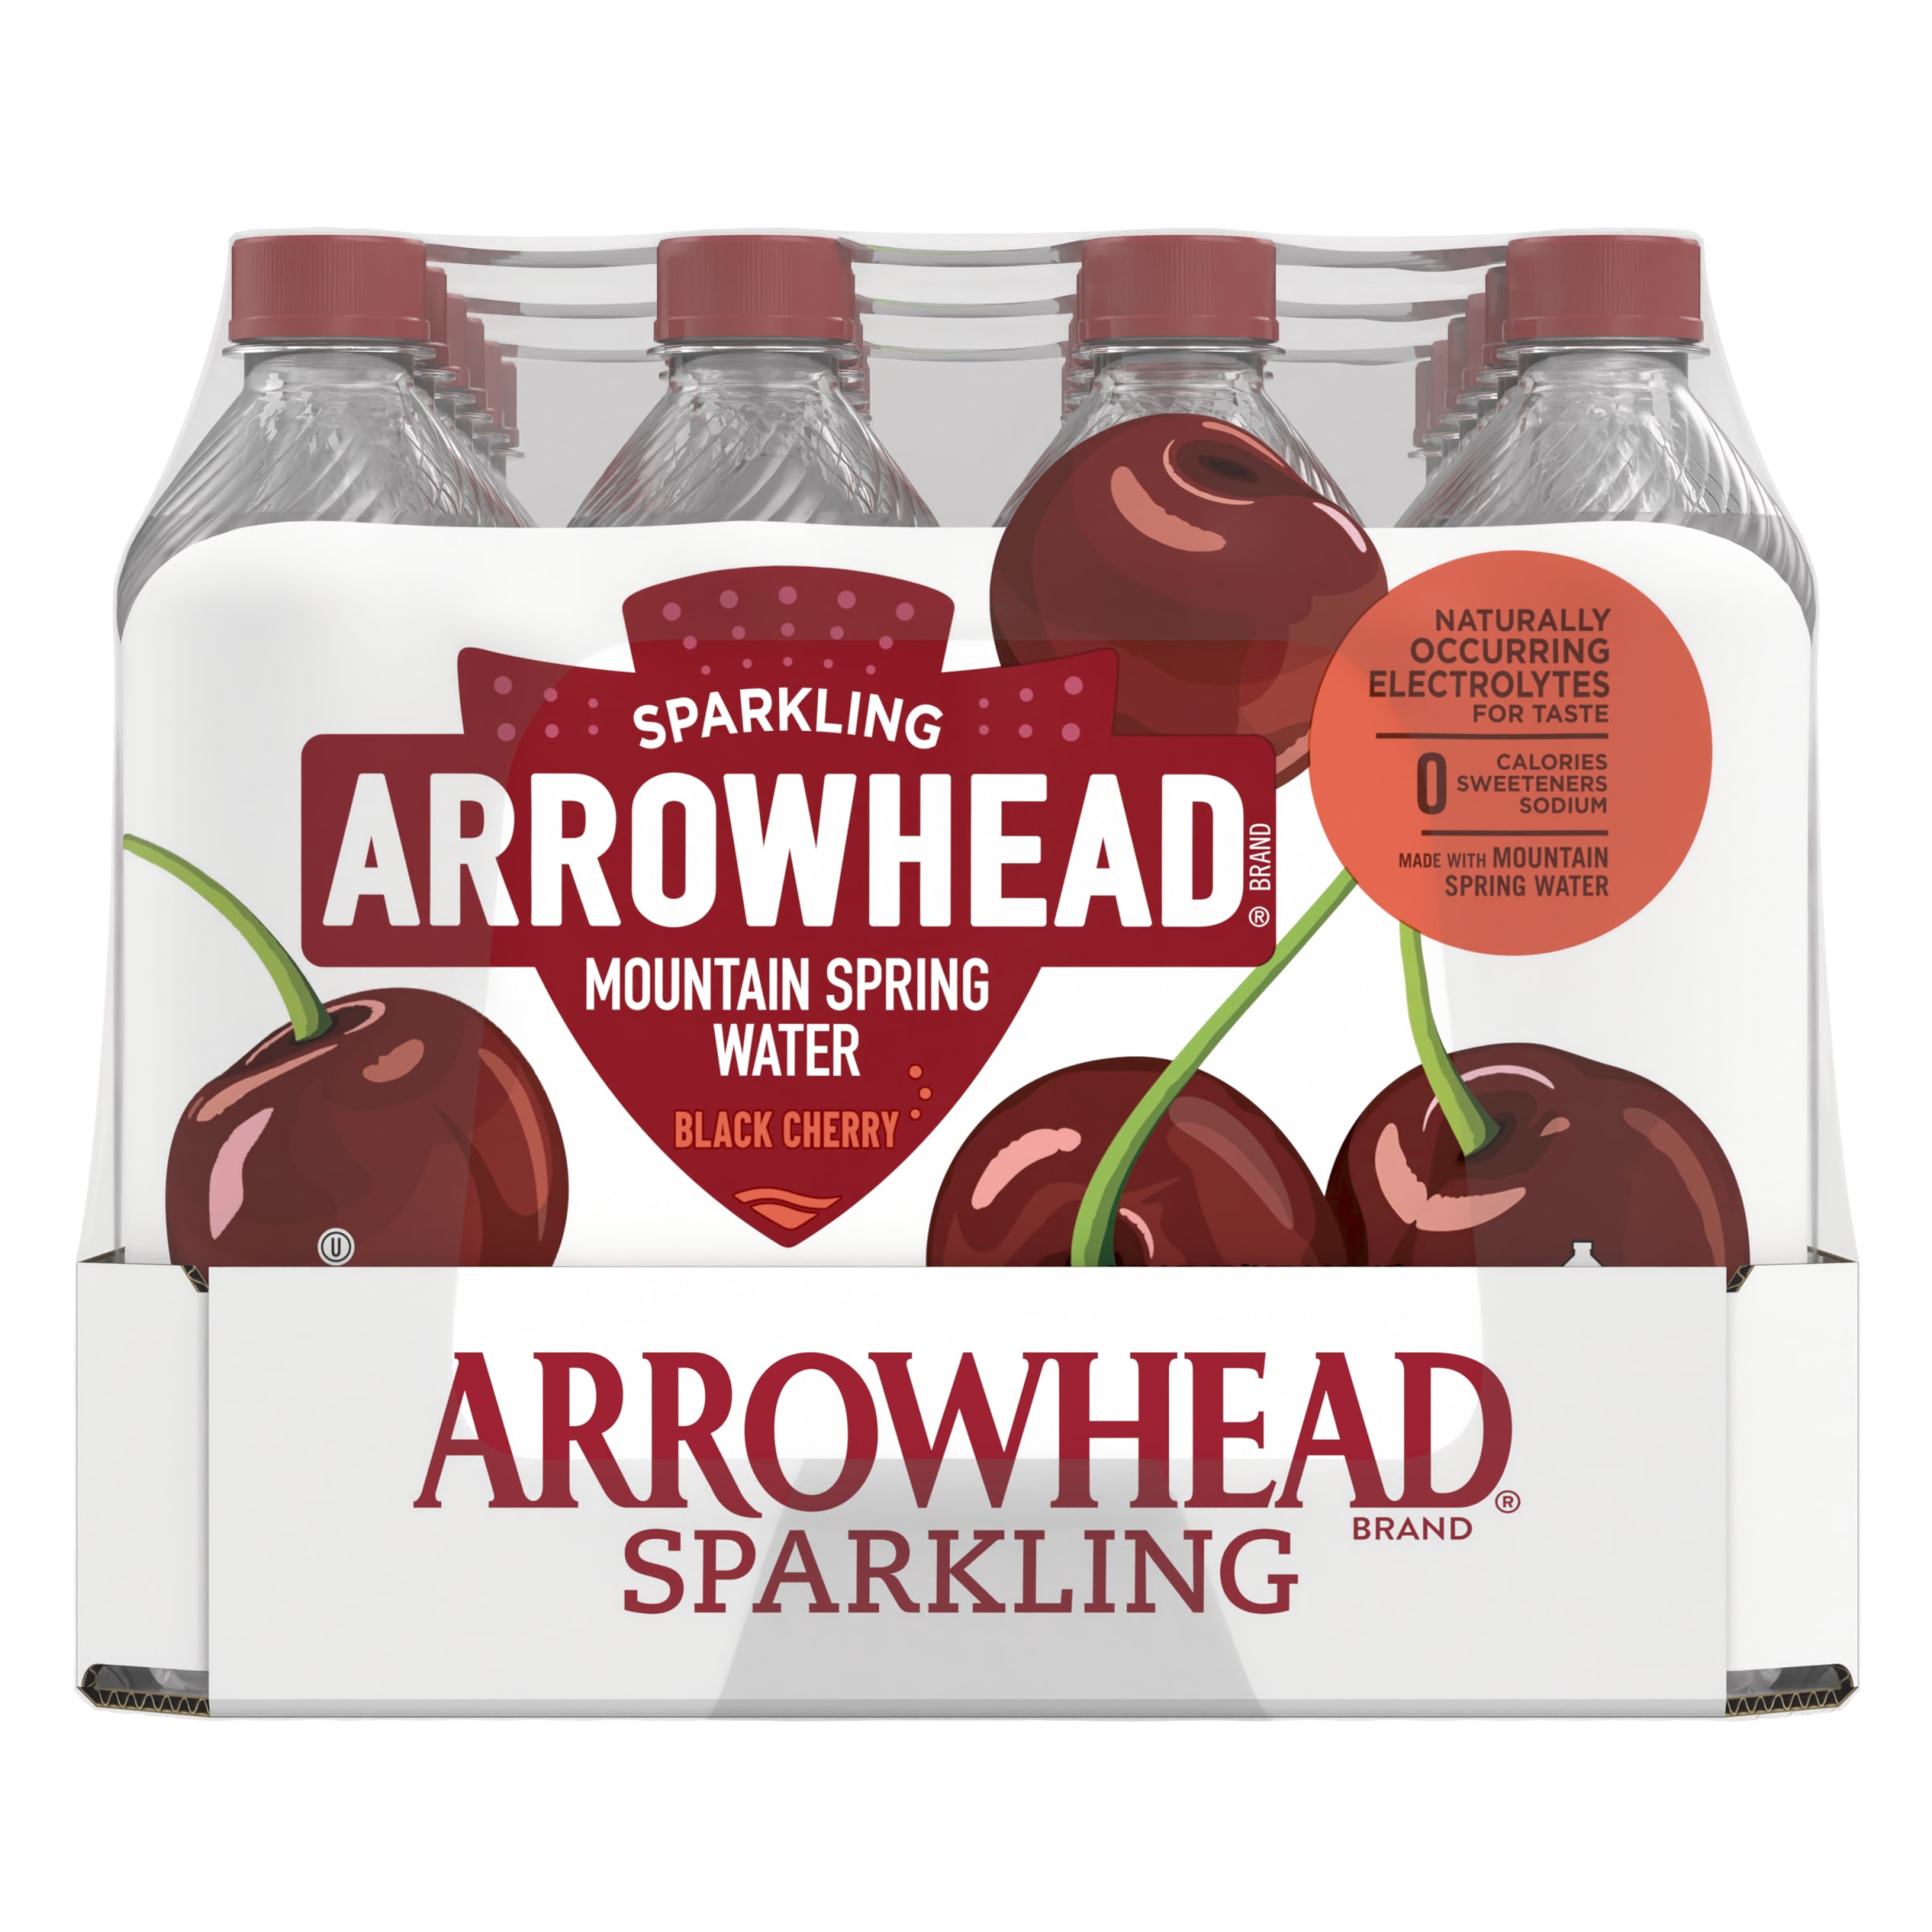 Arrowhead Sparkling Water, Black Cherry, 16.9 oz. Bottles (24 Count) - image 4 of 6